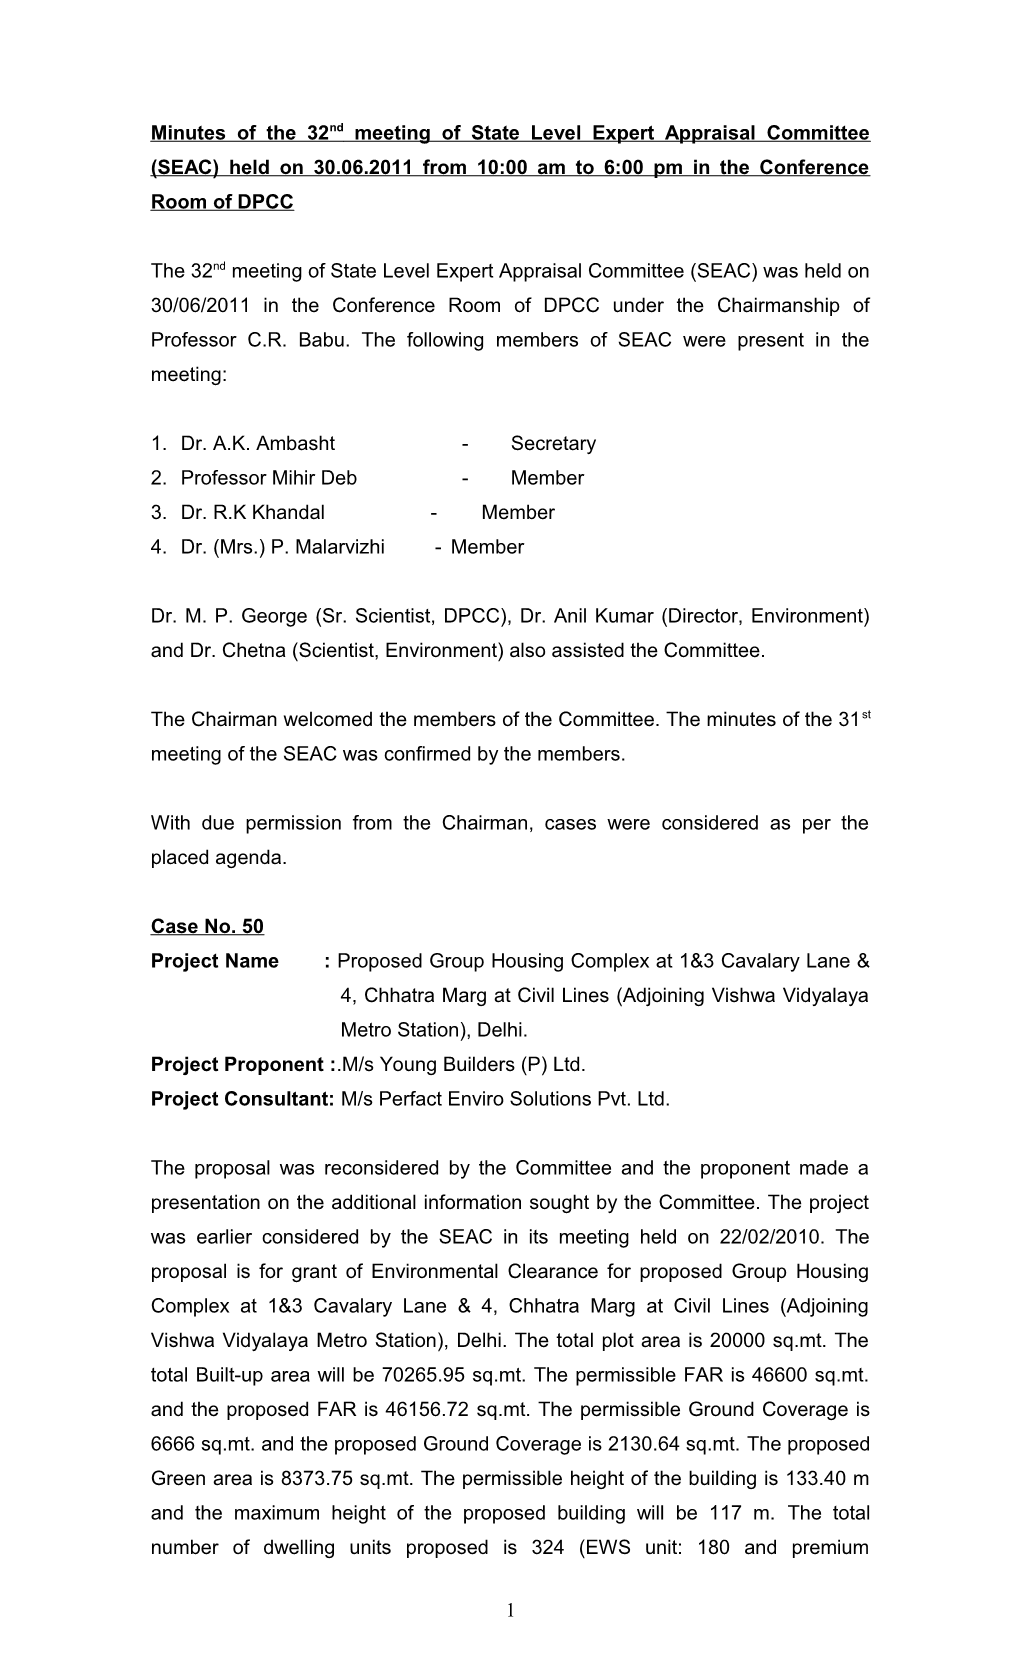 Minutes of the 32Nd Meeting of State Level Expert Appraisal Committee (SEAC) Held on 30.06.2011